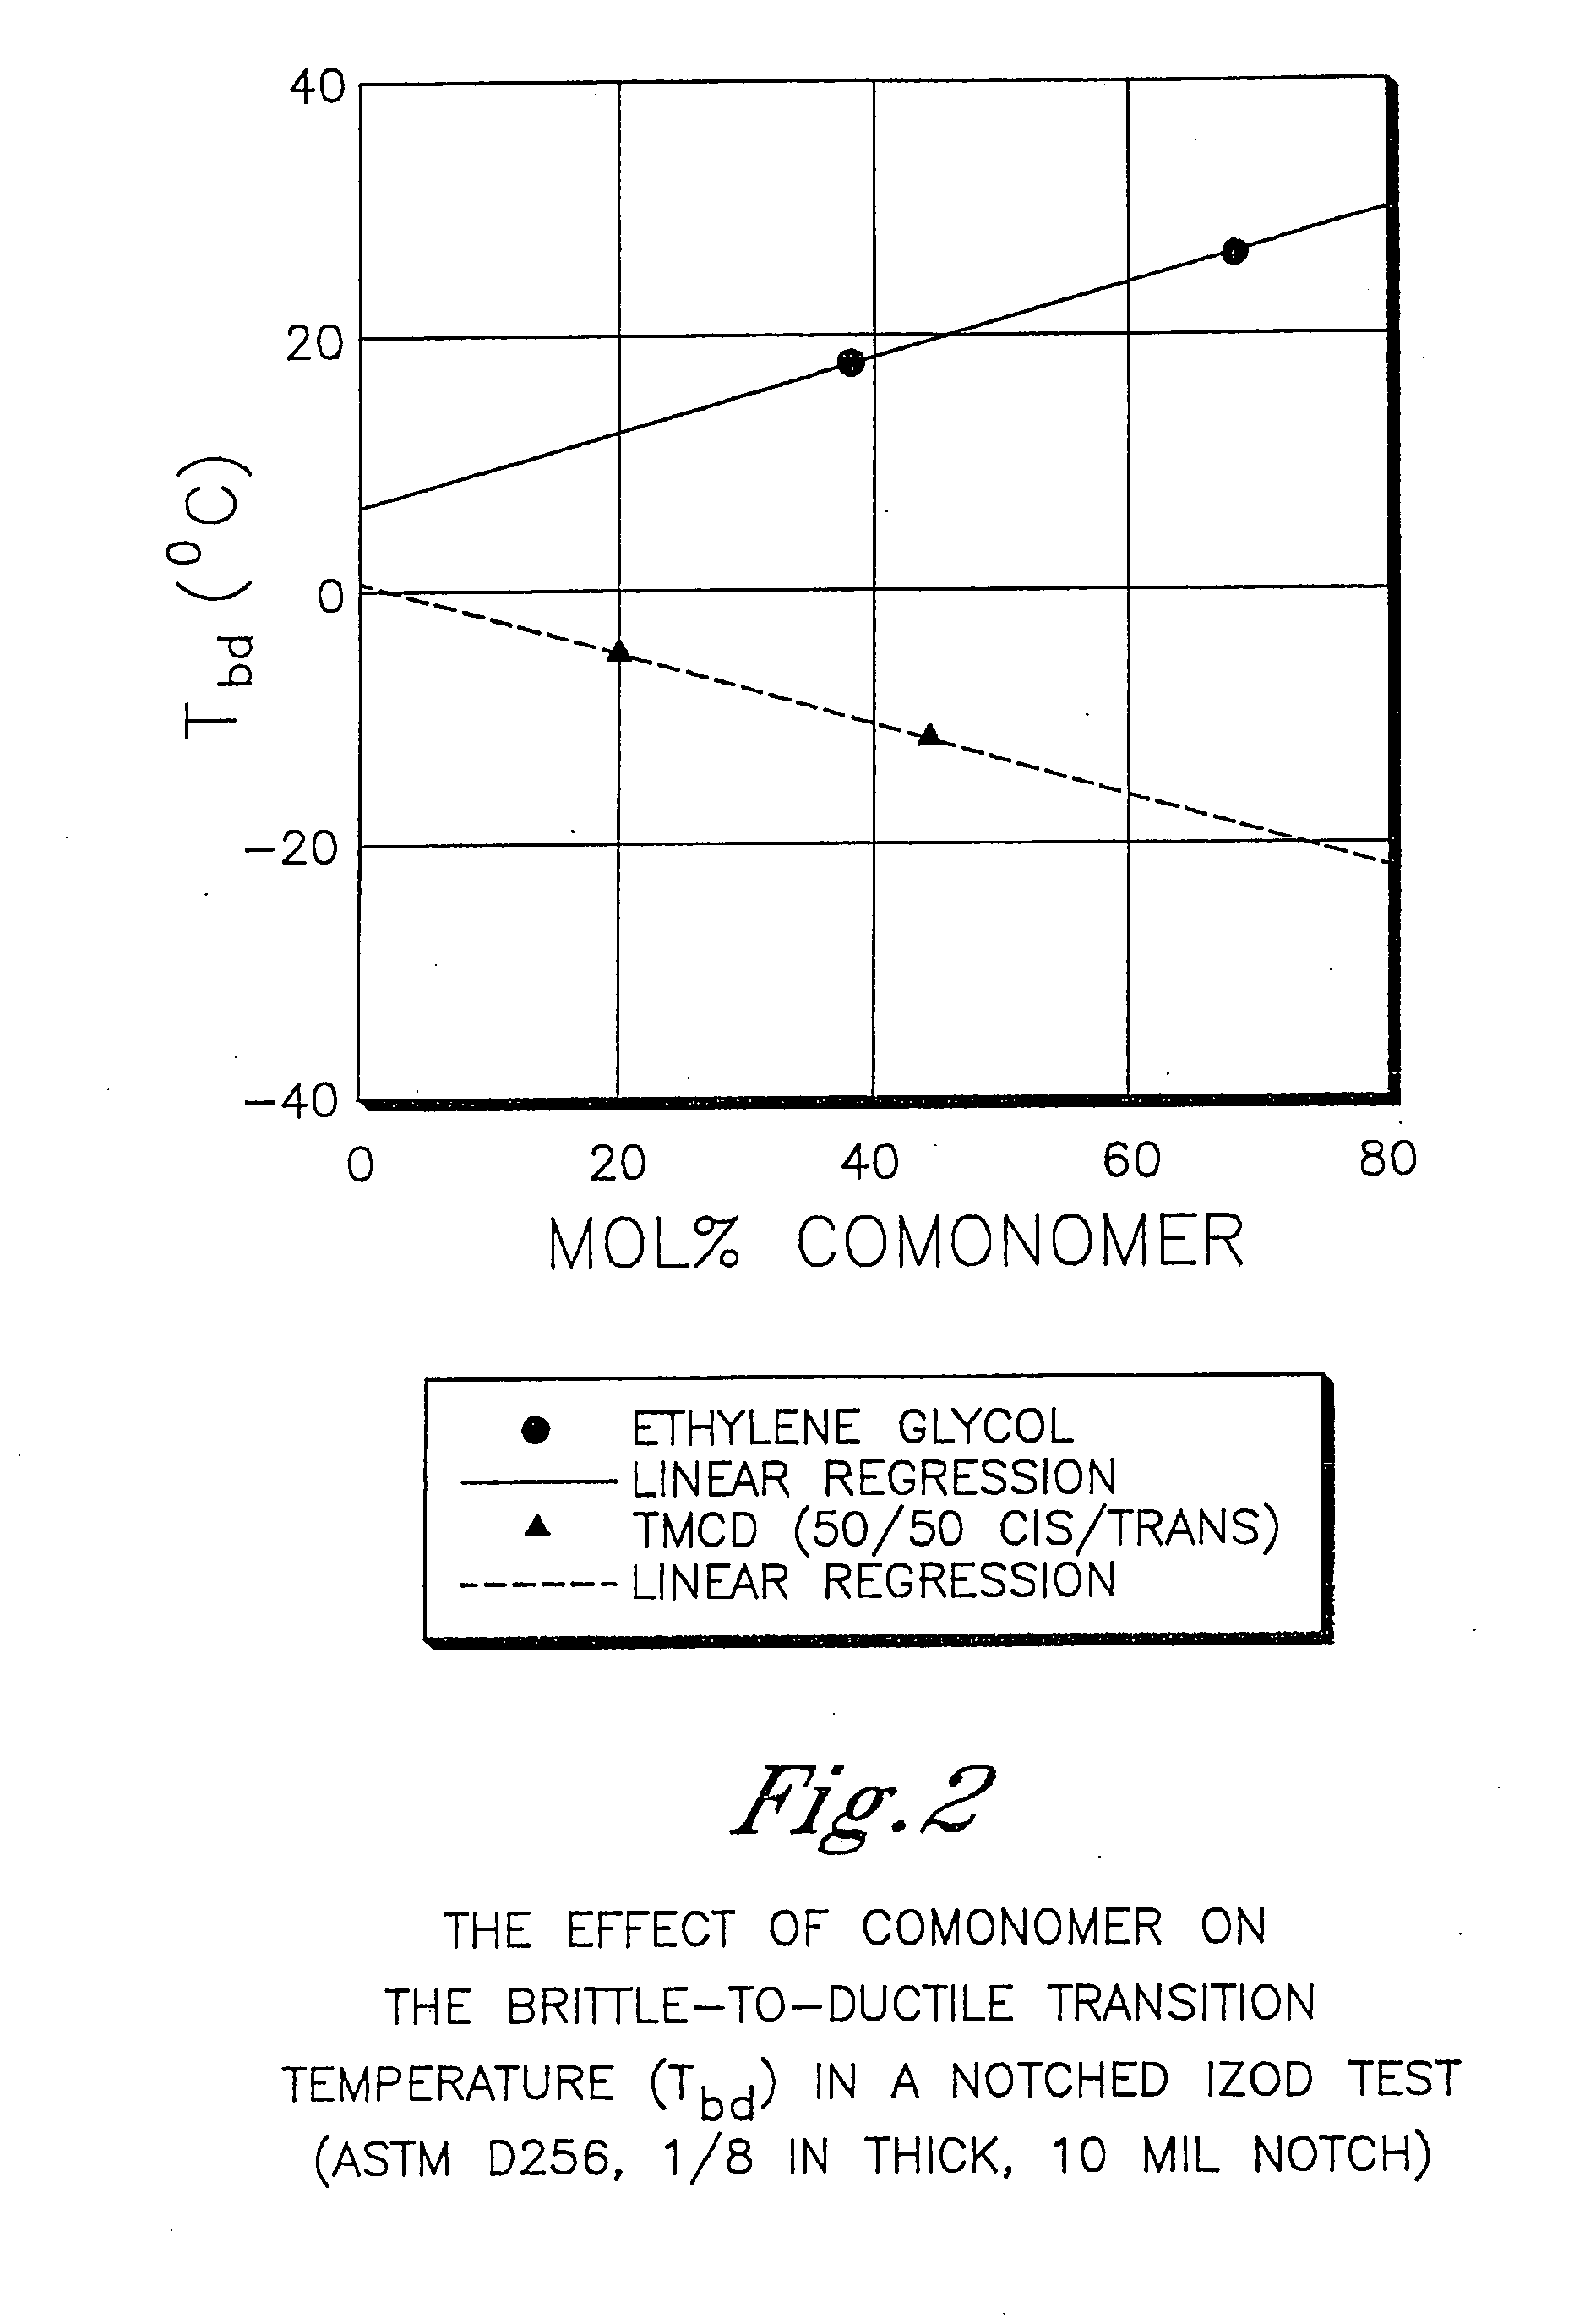 LCD films comprising polyester compositions formed from 2,2,4,4-tetramethyl-1,3-cyclobutanediol and 1,4-cyclohexanedimethanol